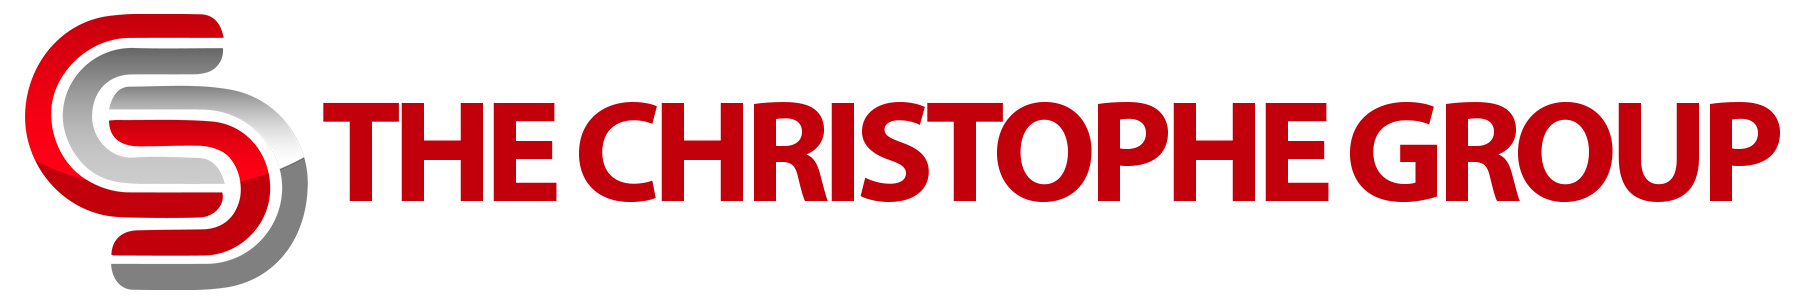 a red and white logo for The Christophe Group